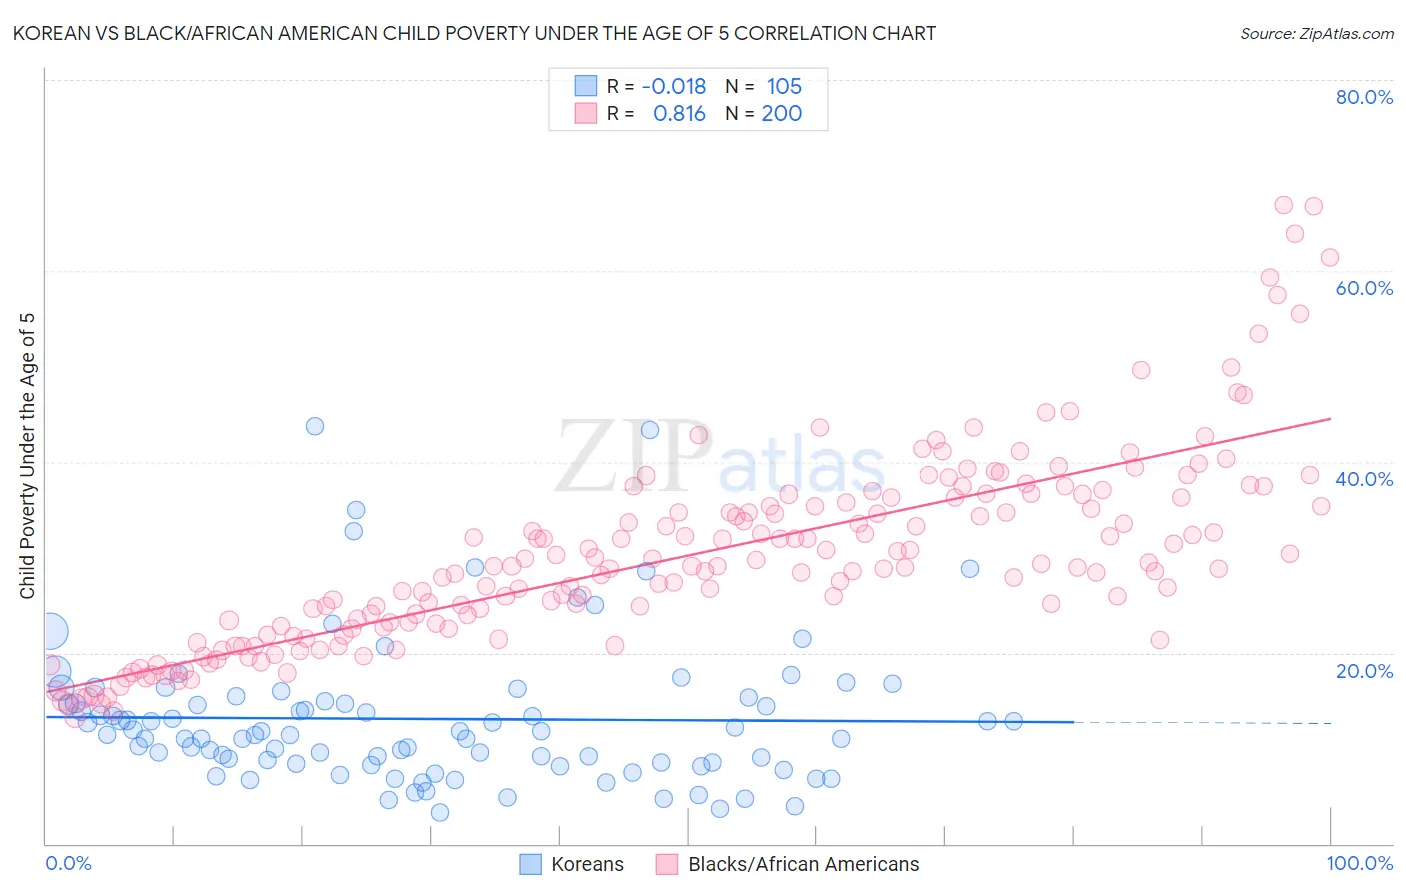 Korean vs Black/African American Child Poverty Under the Age of 5